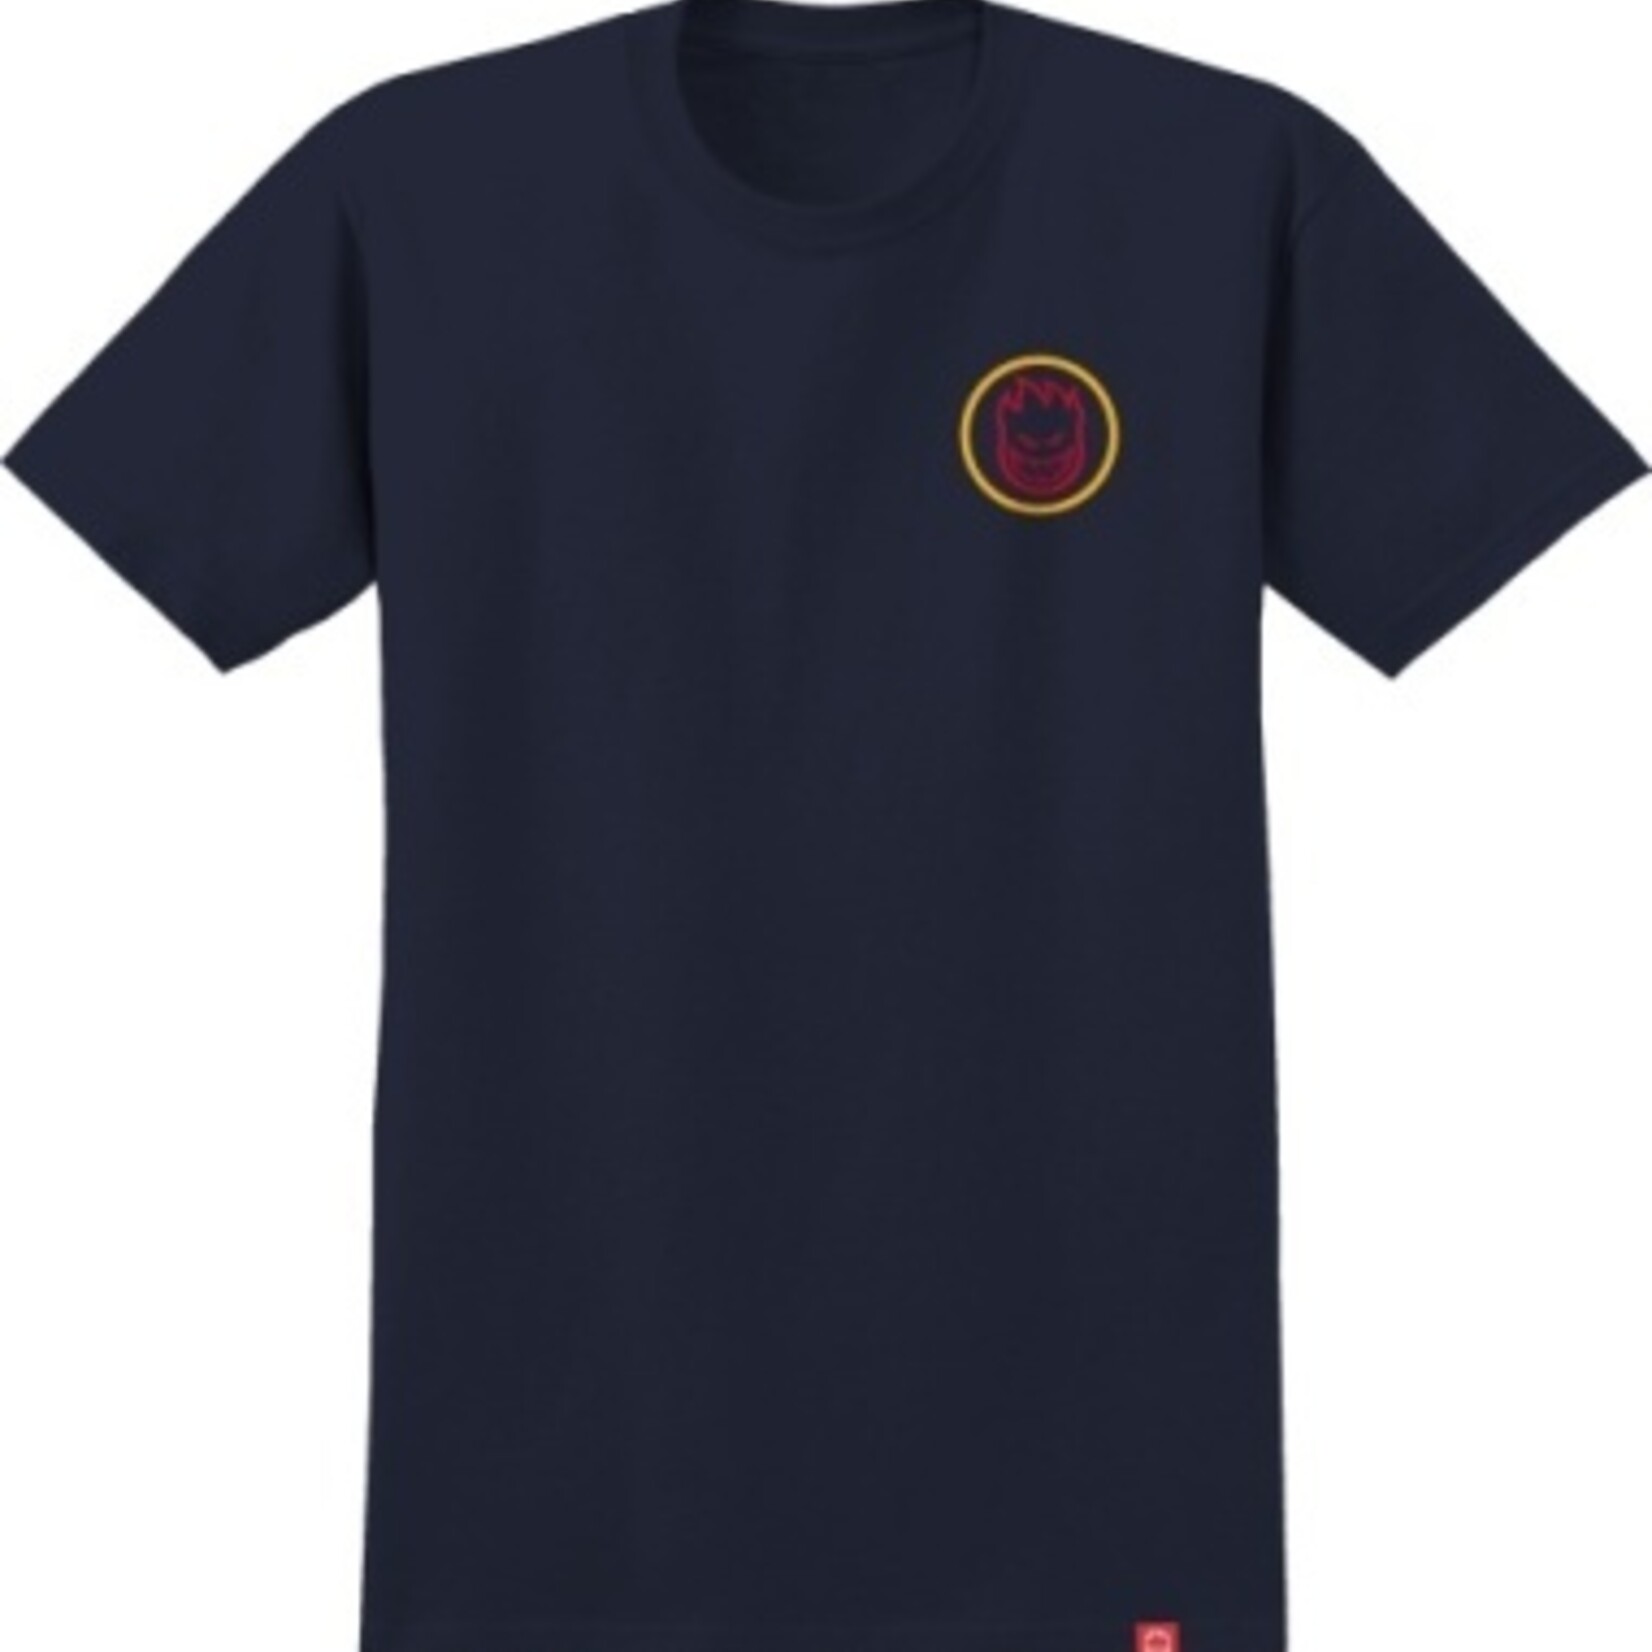 Spitfire Spitfire Classic Swirl SS Tee Navy w/Red